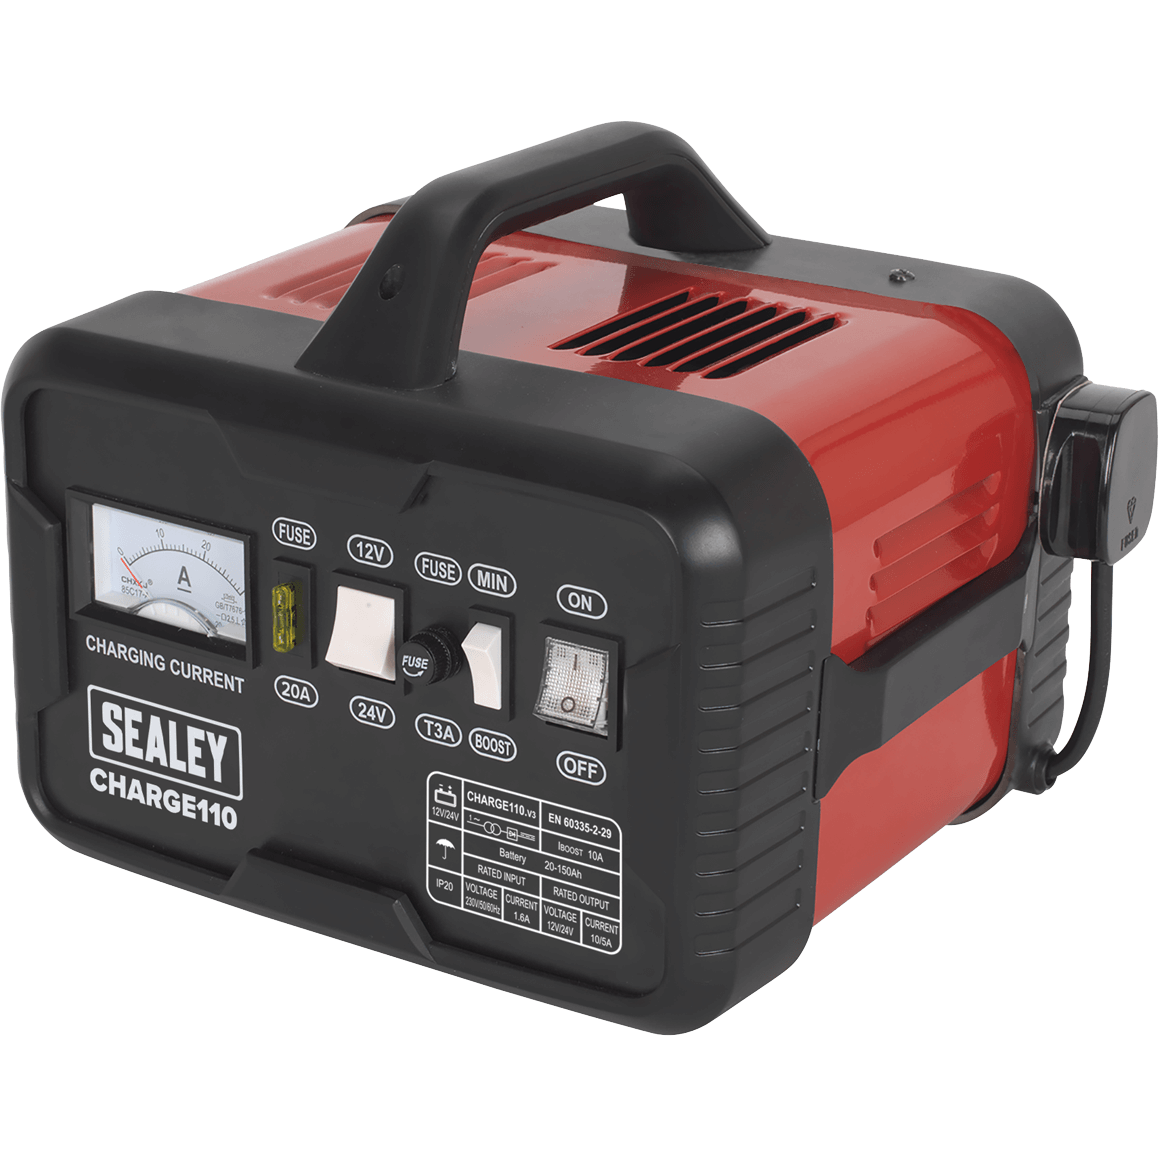 Sealey CHARGE110 Automotive Battery Charger 12v or 24v